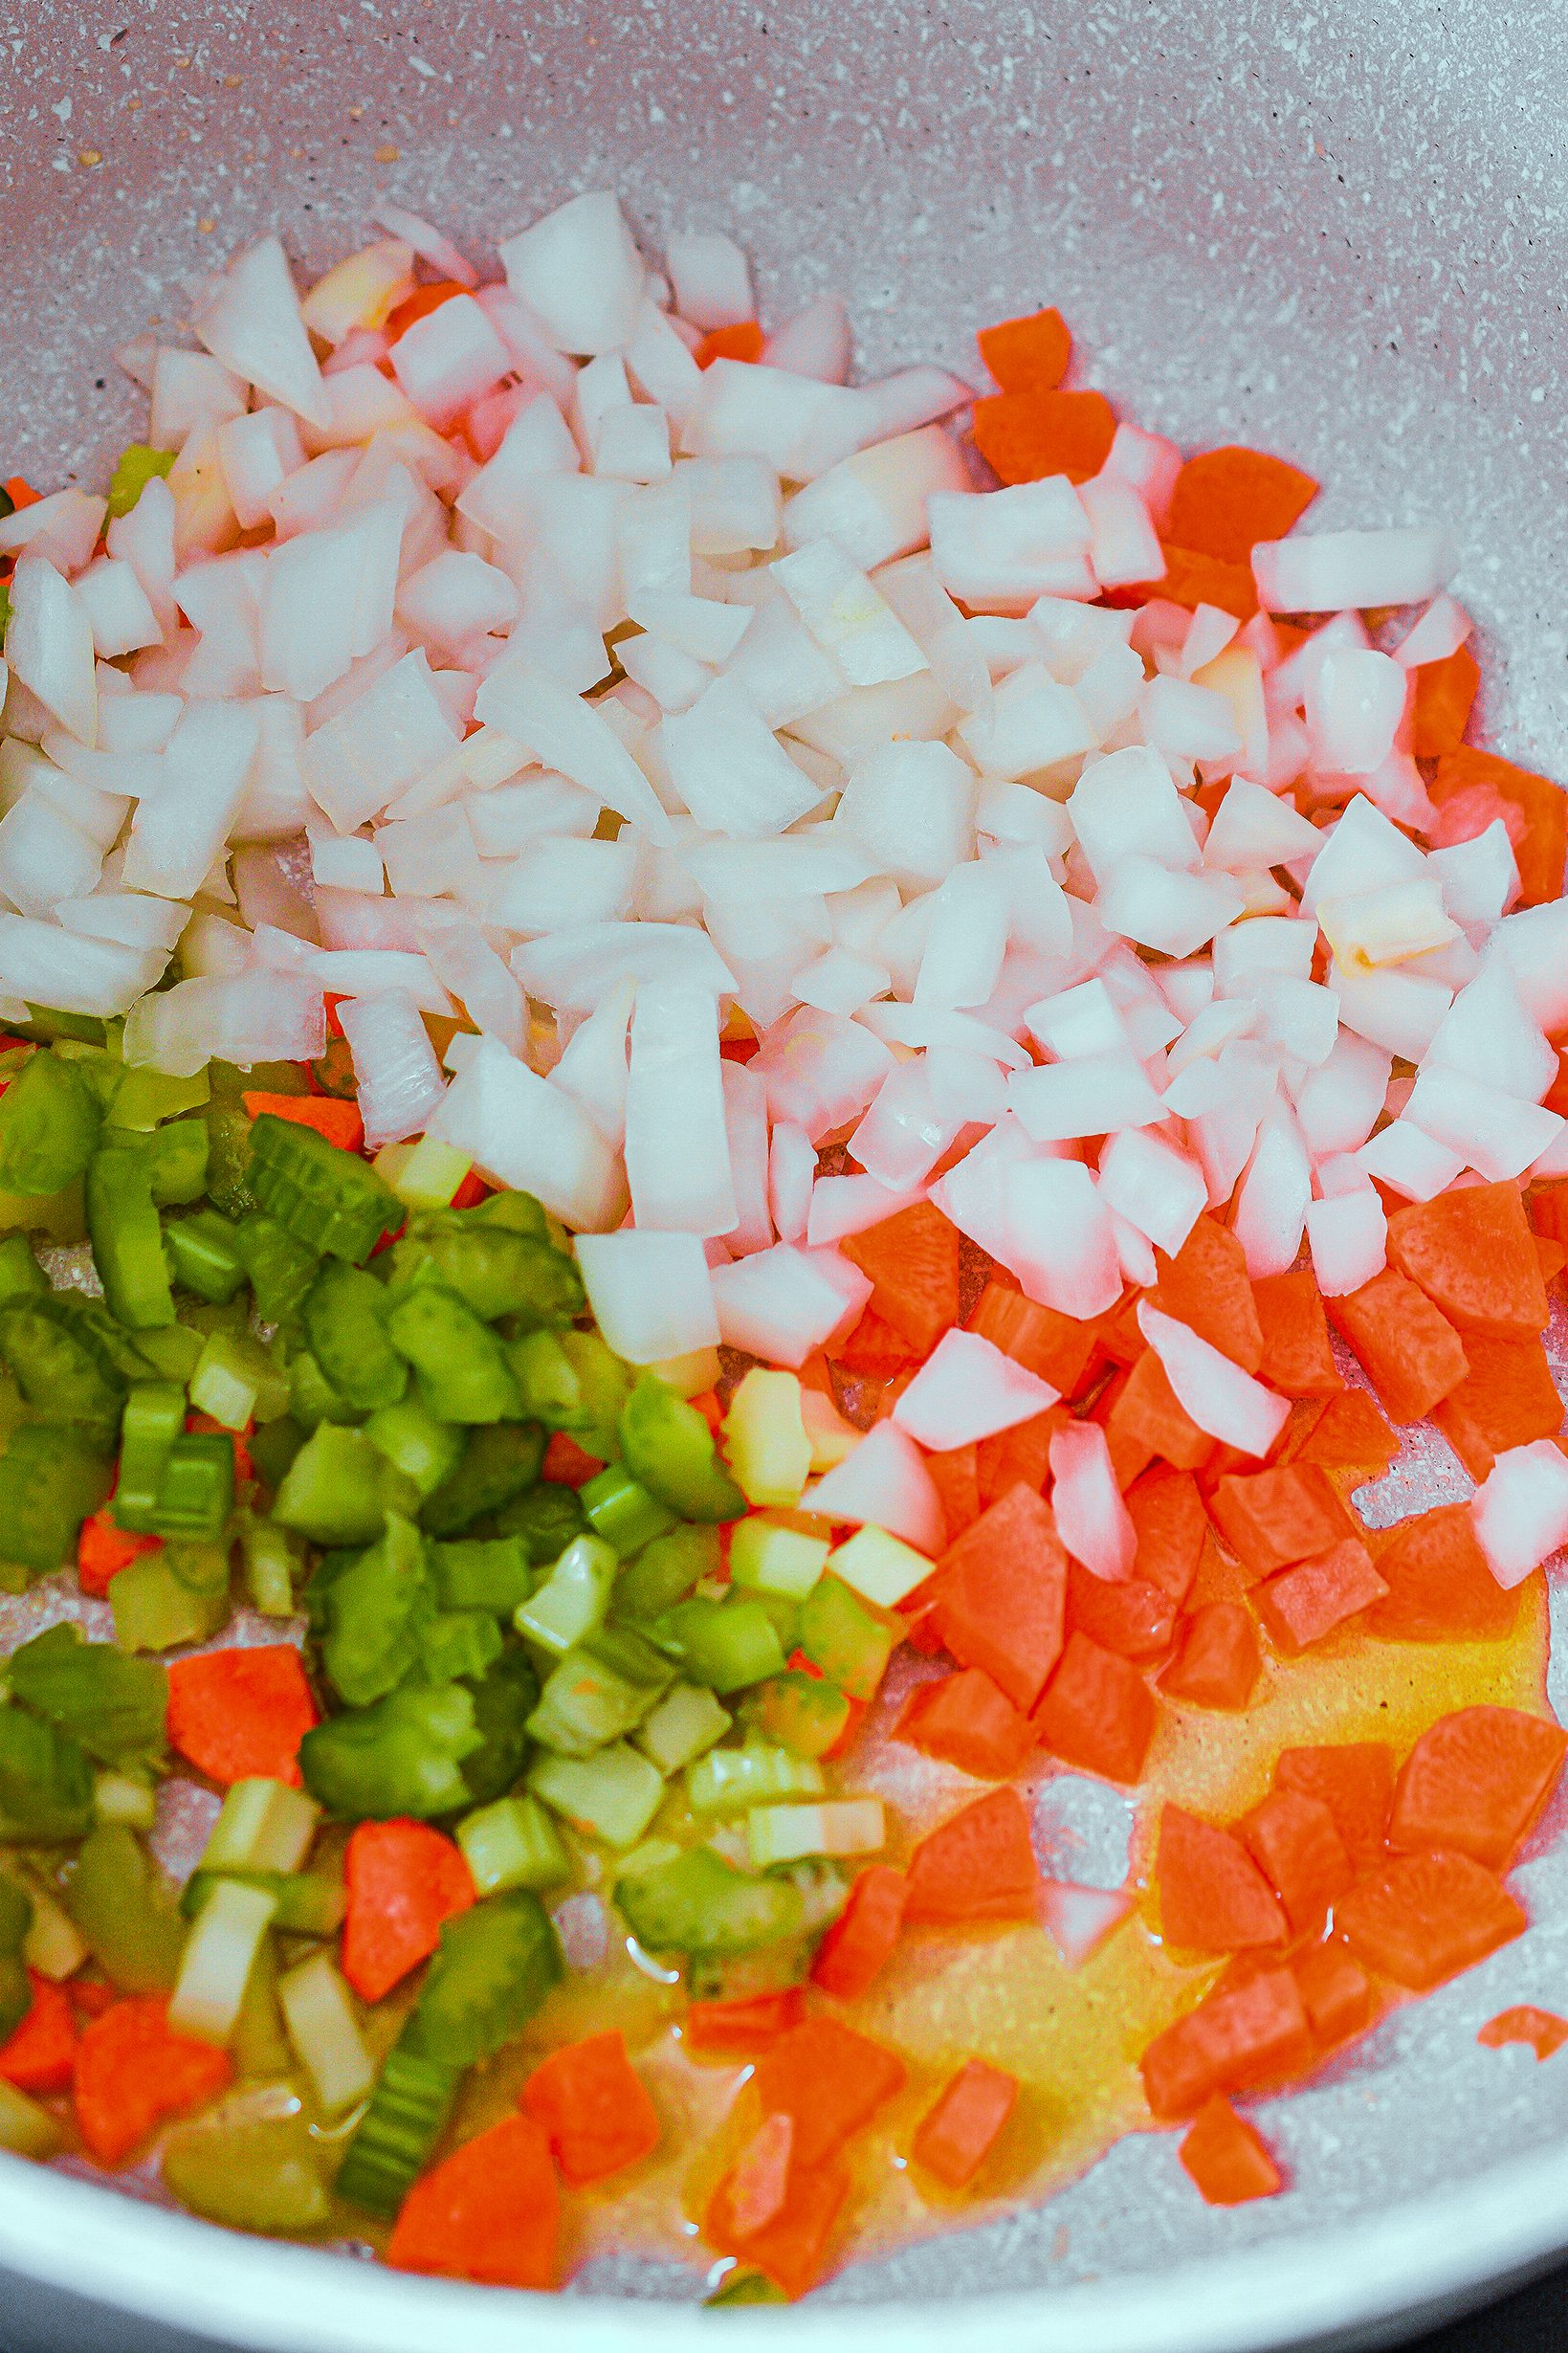 Add the celery, onion, and carrots to the pot, and saute until becoming tender.